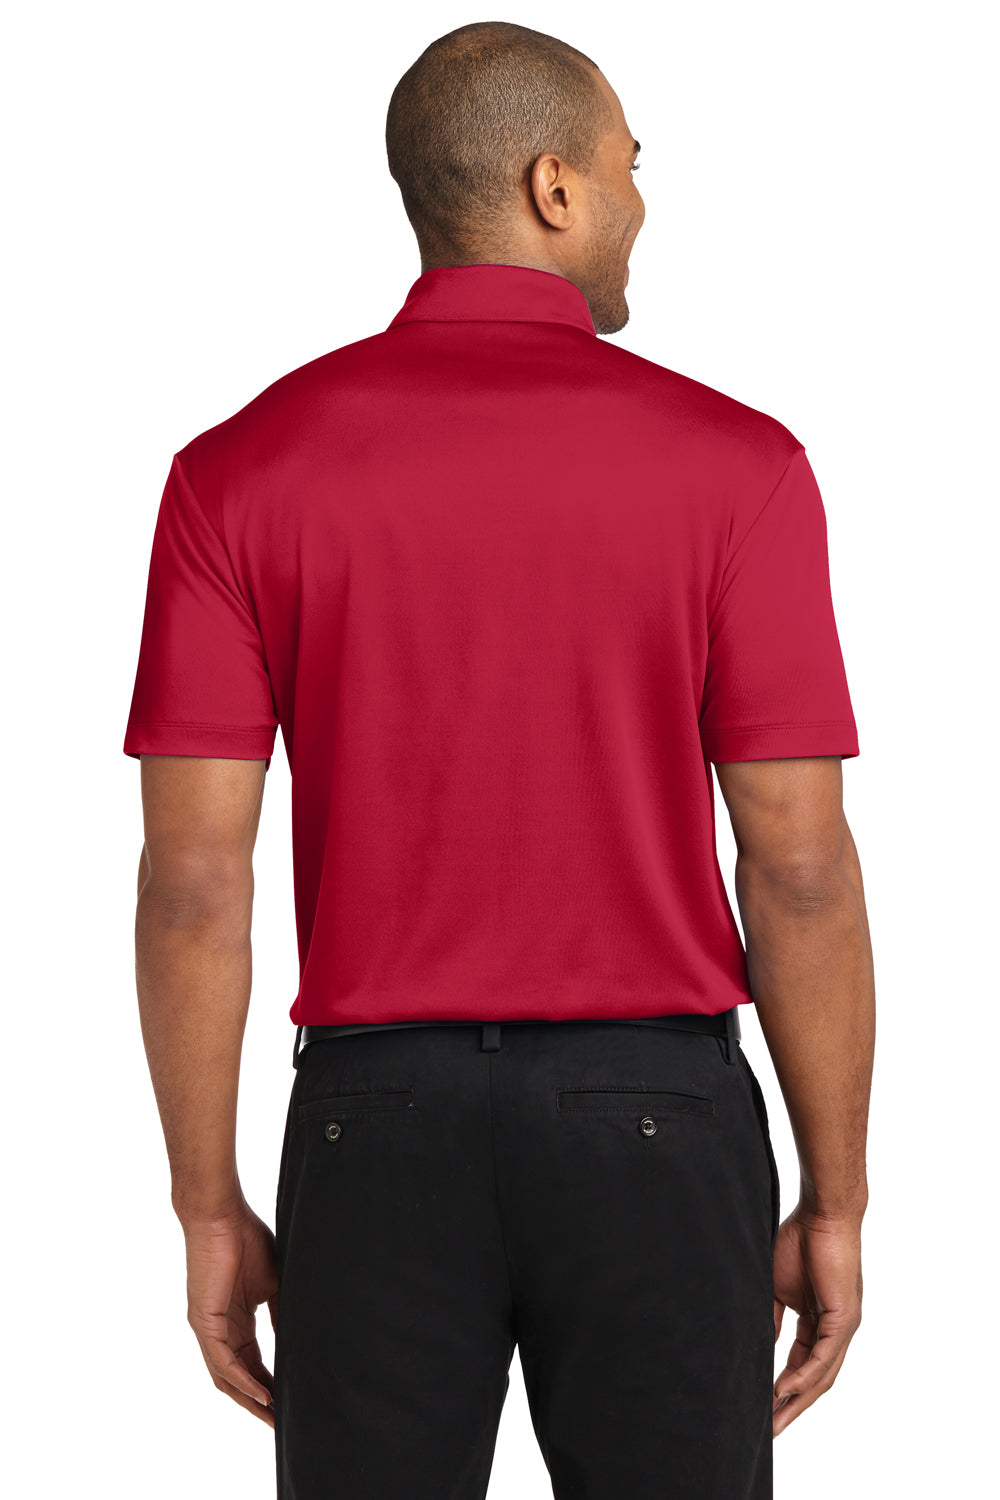 Port Authority K540P Mens Silk Touch Performance Moisture Wicking Short Sleeve Polo Shirt w/ Pocket Red Back